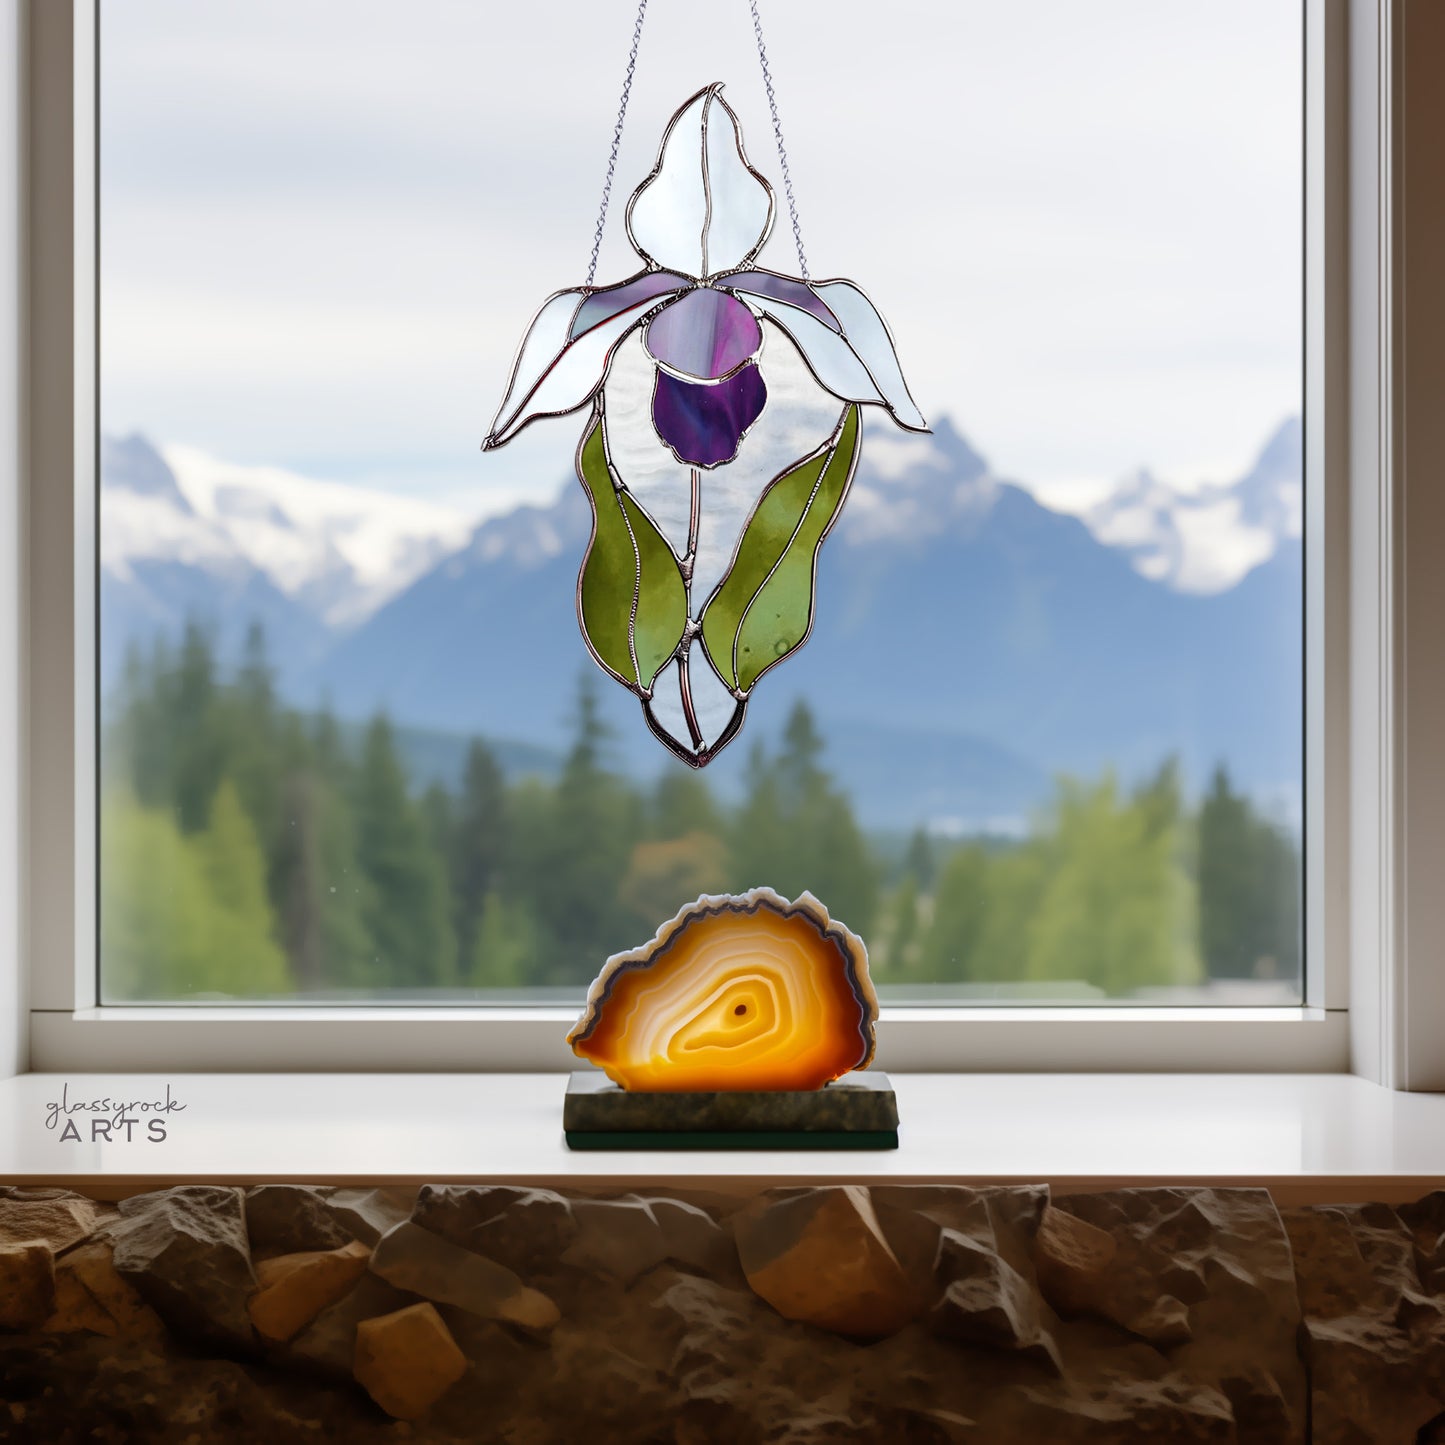 Lady Slipper Orchid Stained Glass Pattern